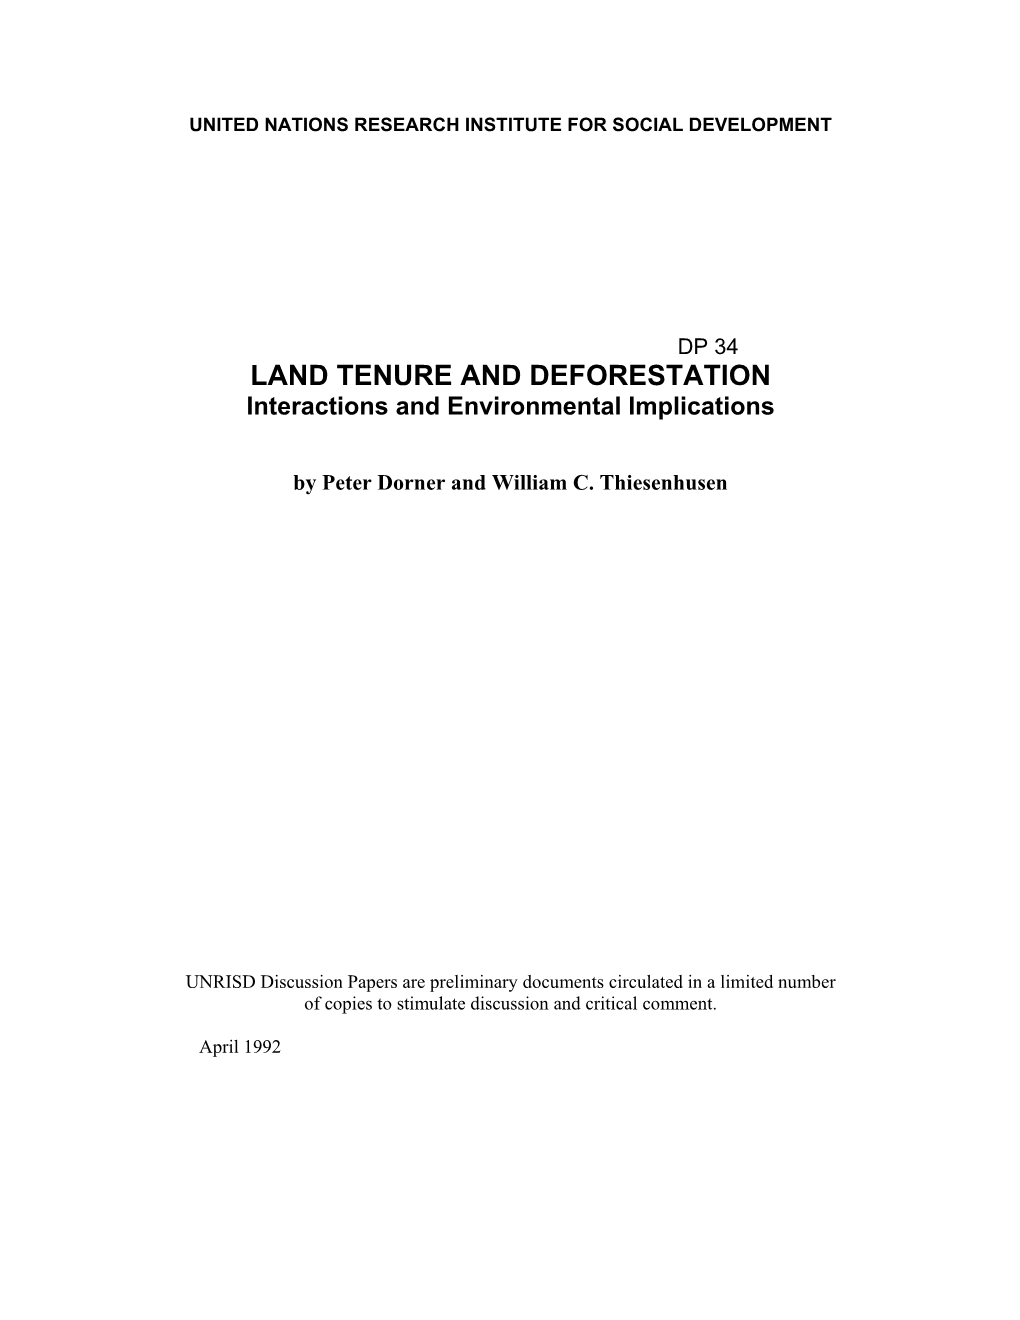 LAND TENURE and DEFORESTATION Interactions and Environmental Implications